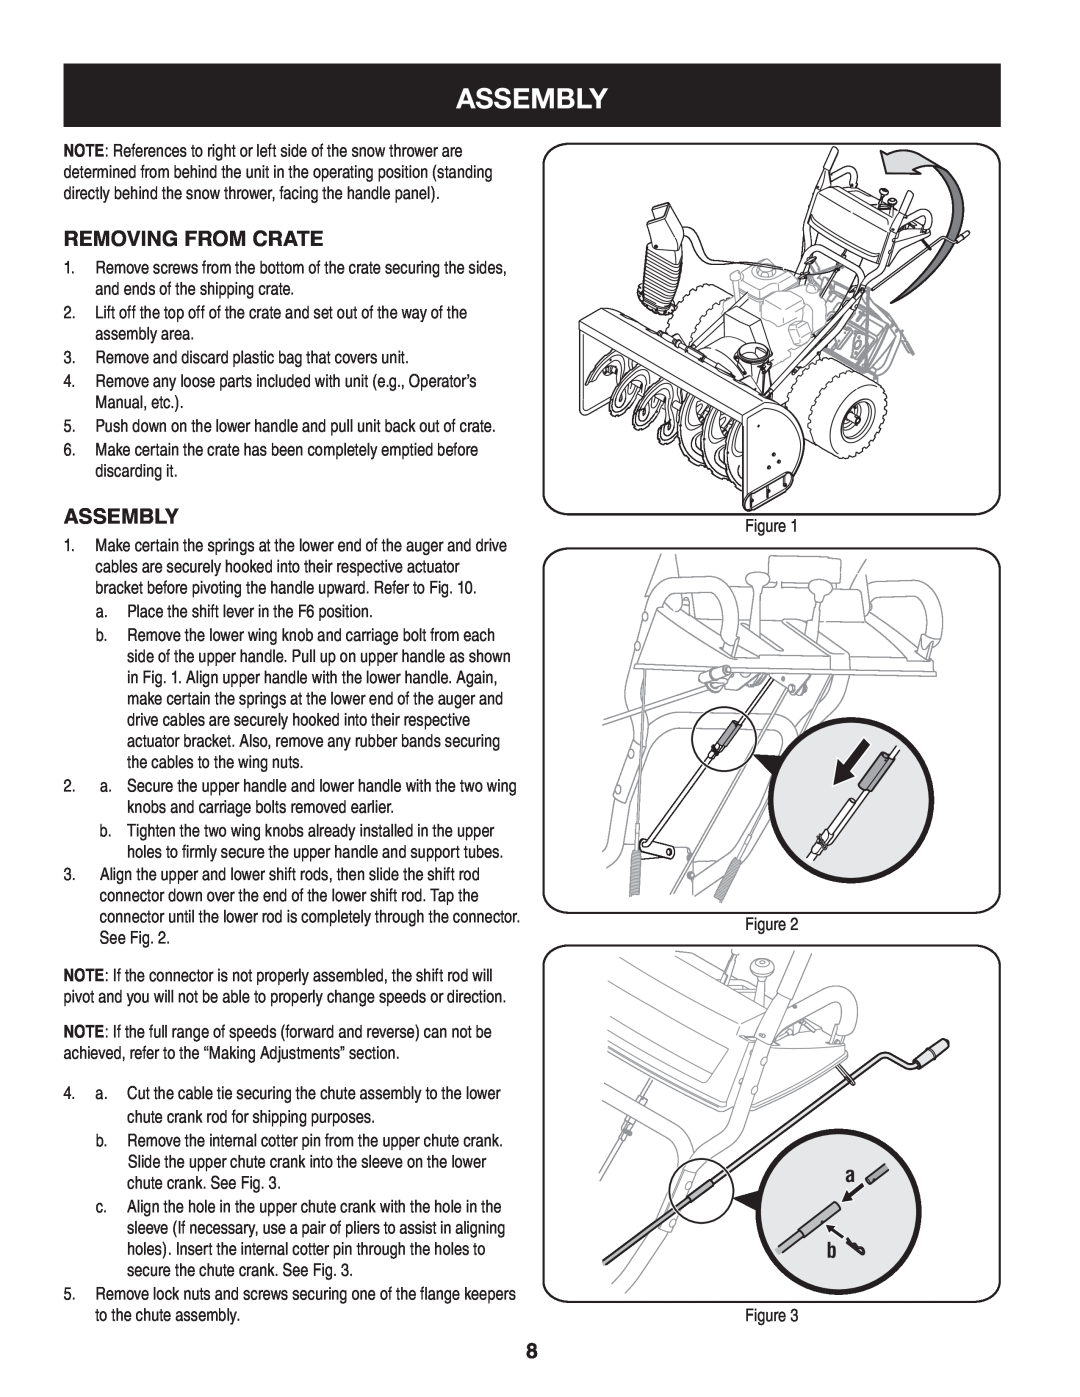 Craftsman 247.88845 manual Assembly, Removing From Crate, assembly 